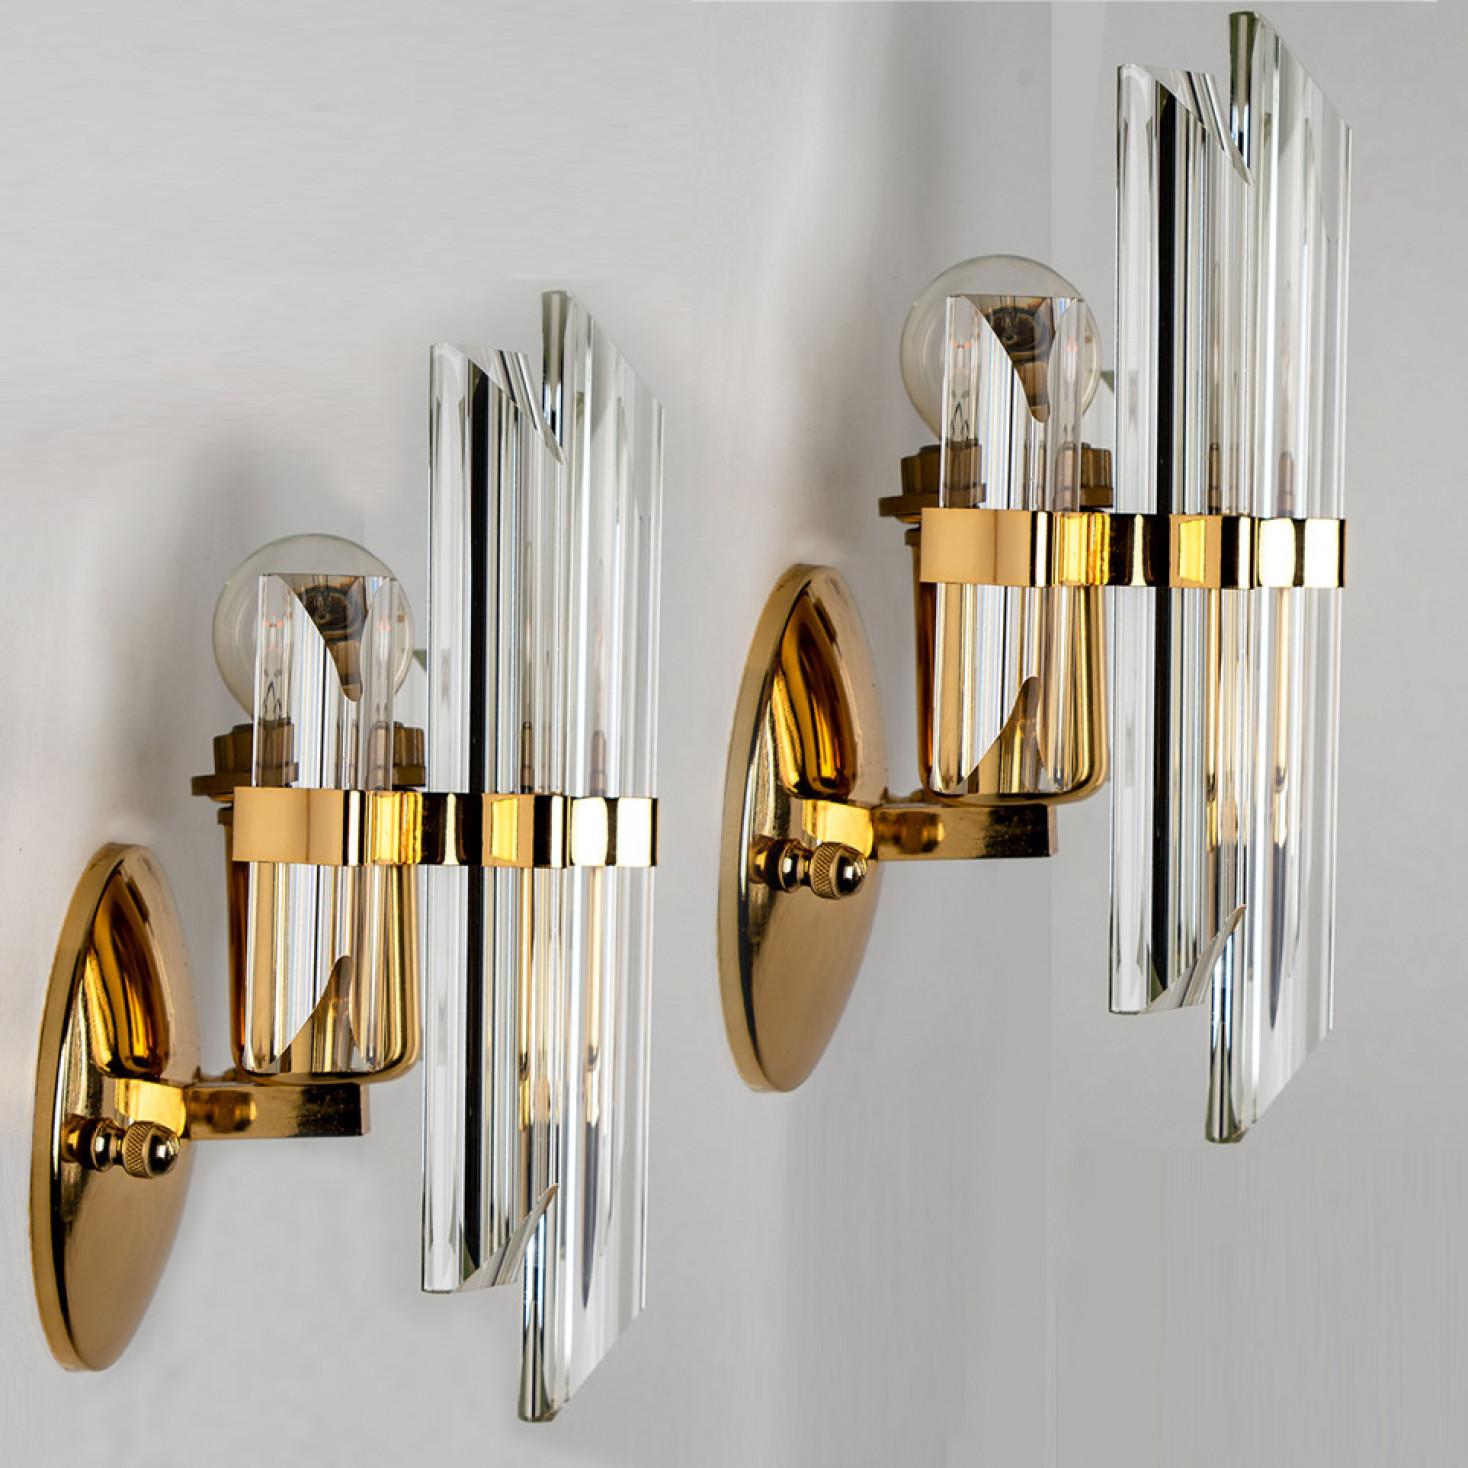 One of the three Murano glass wall sconces featuring five crystal clear glass 